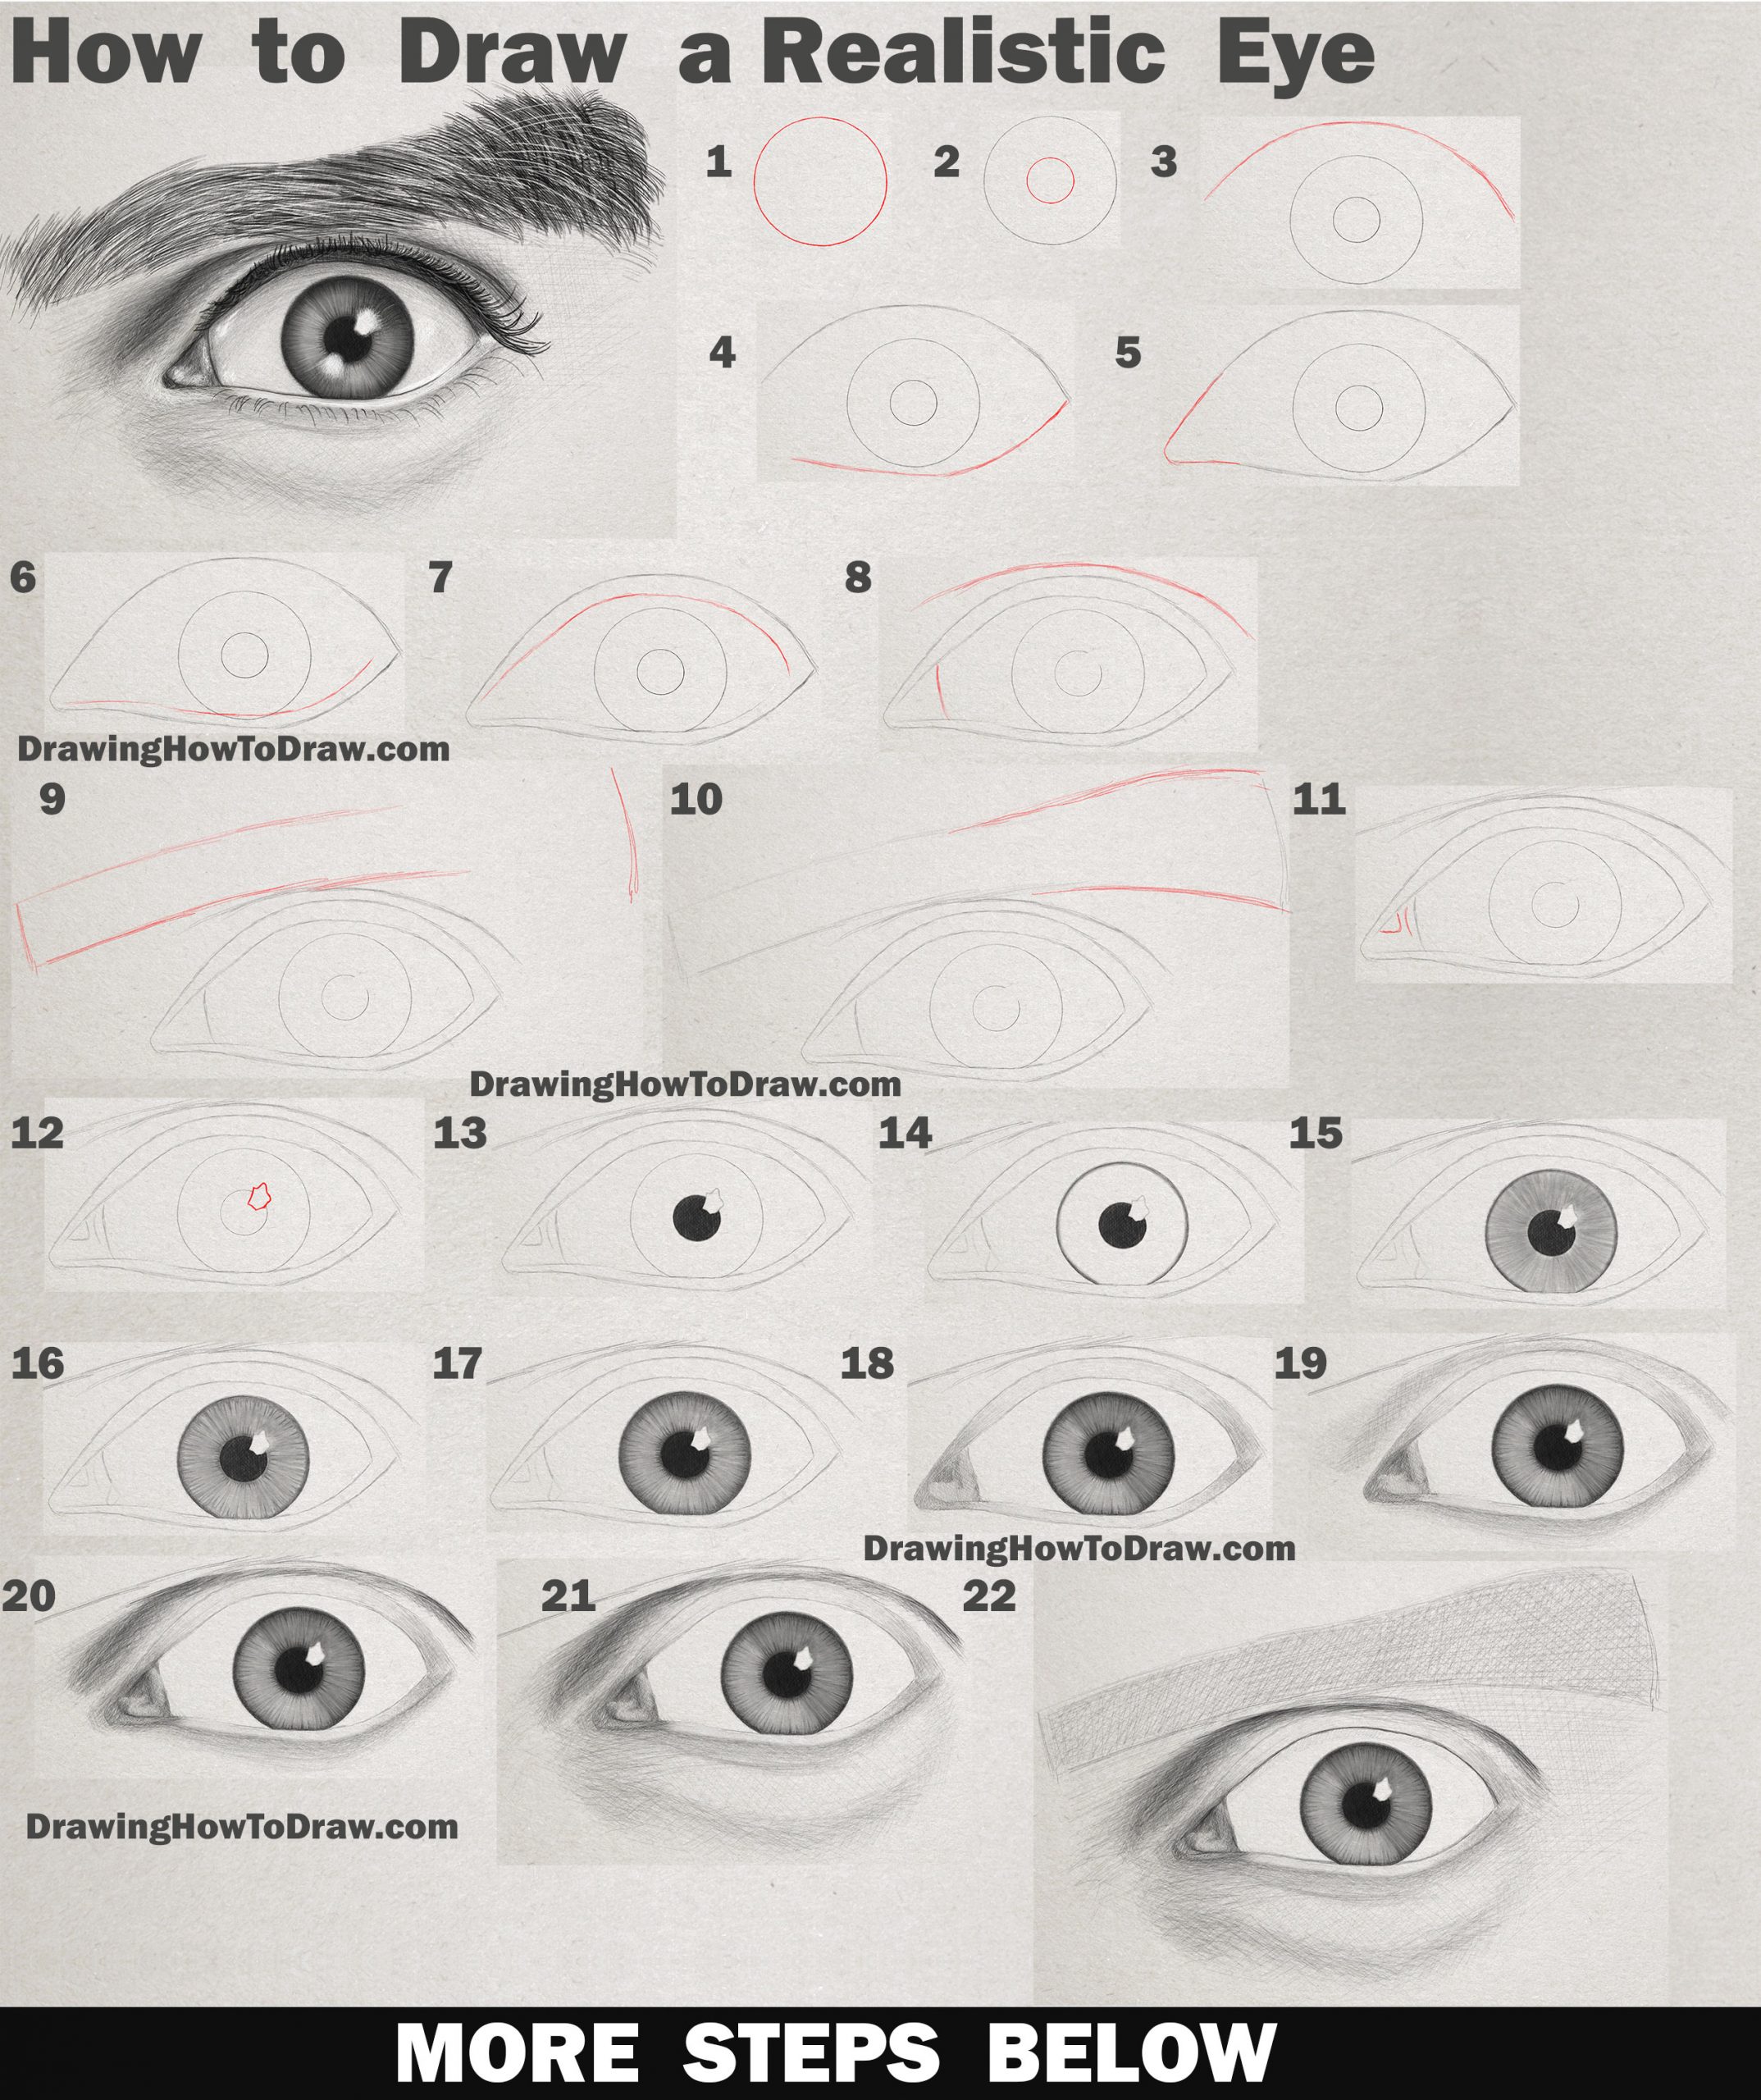 How to Draw an Eye Realistic Man's Eye Step by Step Drawing